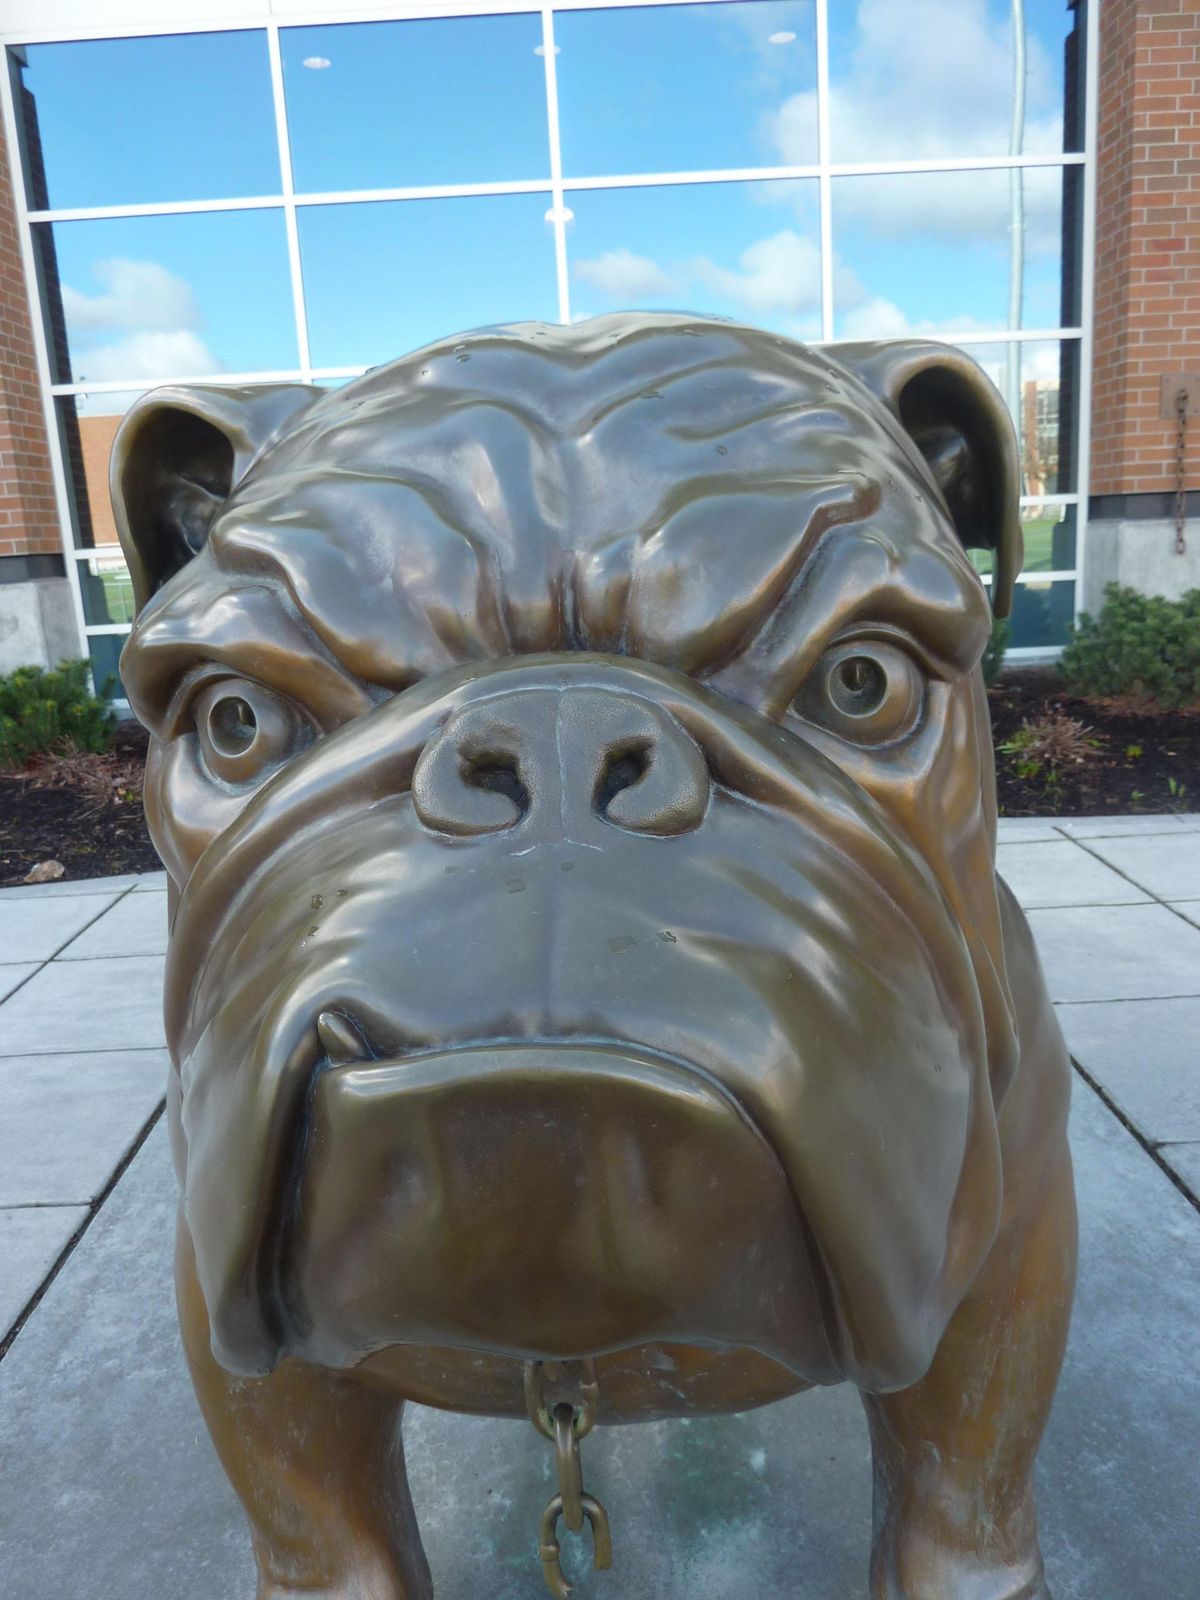 This photo shows the overall conformation of Vincent De Felice’s bulldog, and its facial features including a protruding tooth. (Stefanie Pettit Special to The Spokesman-Review)